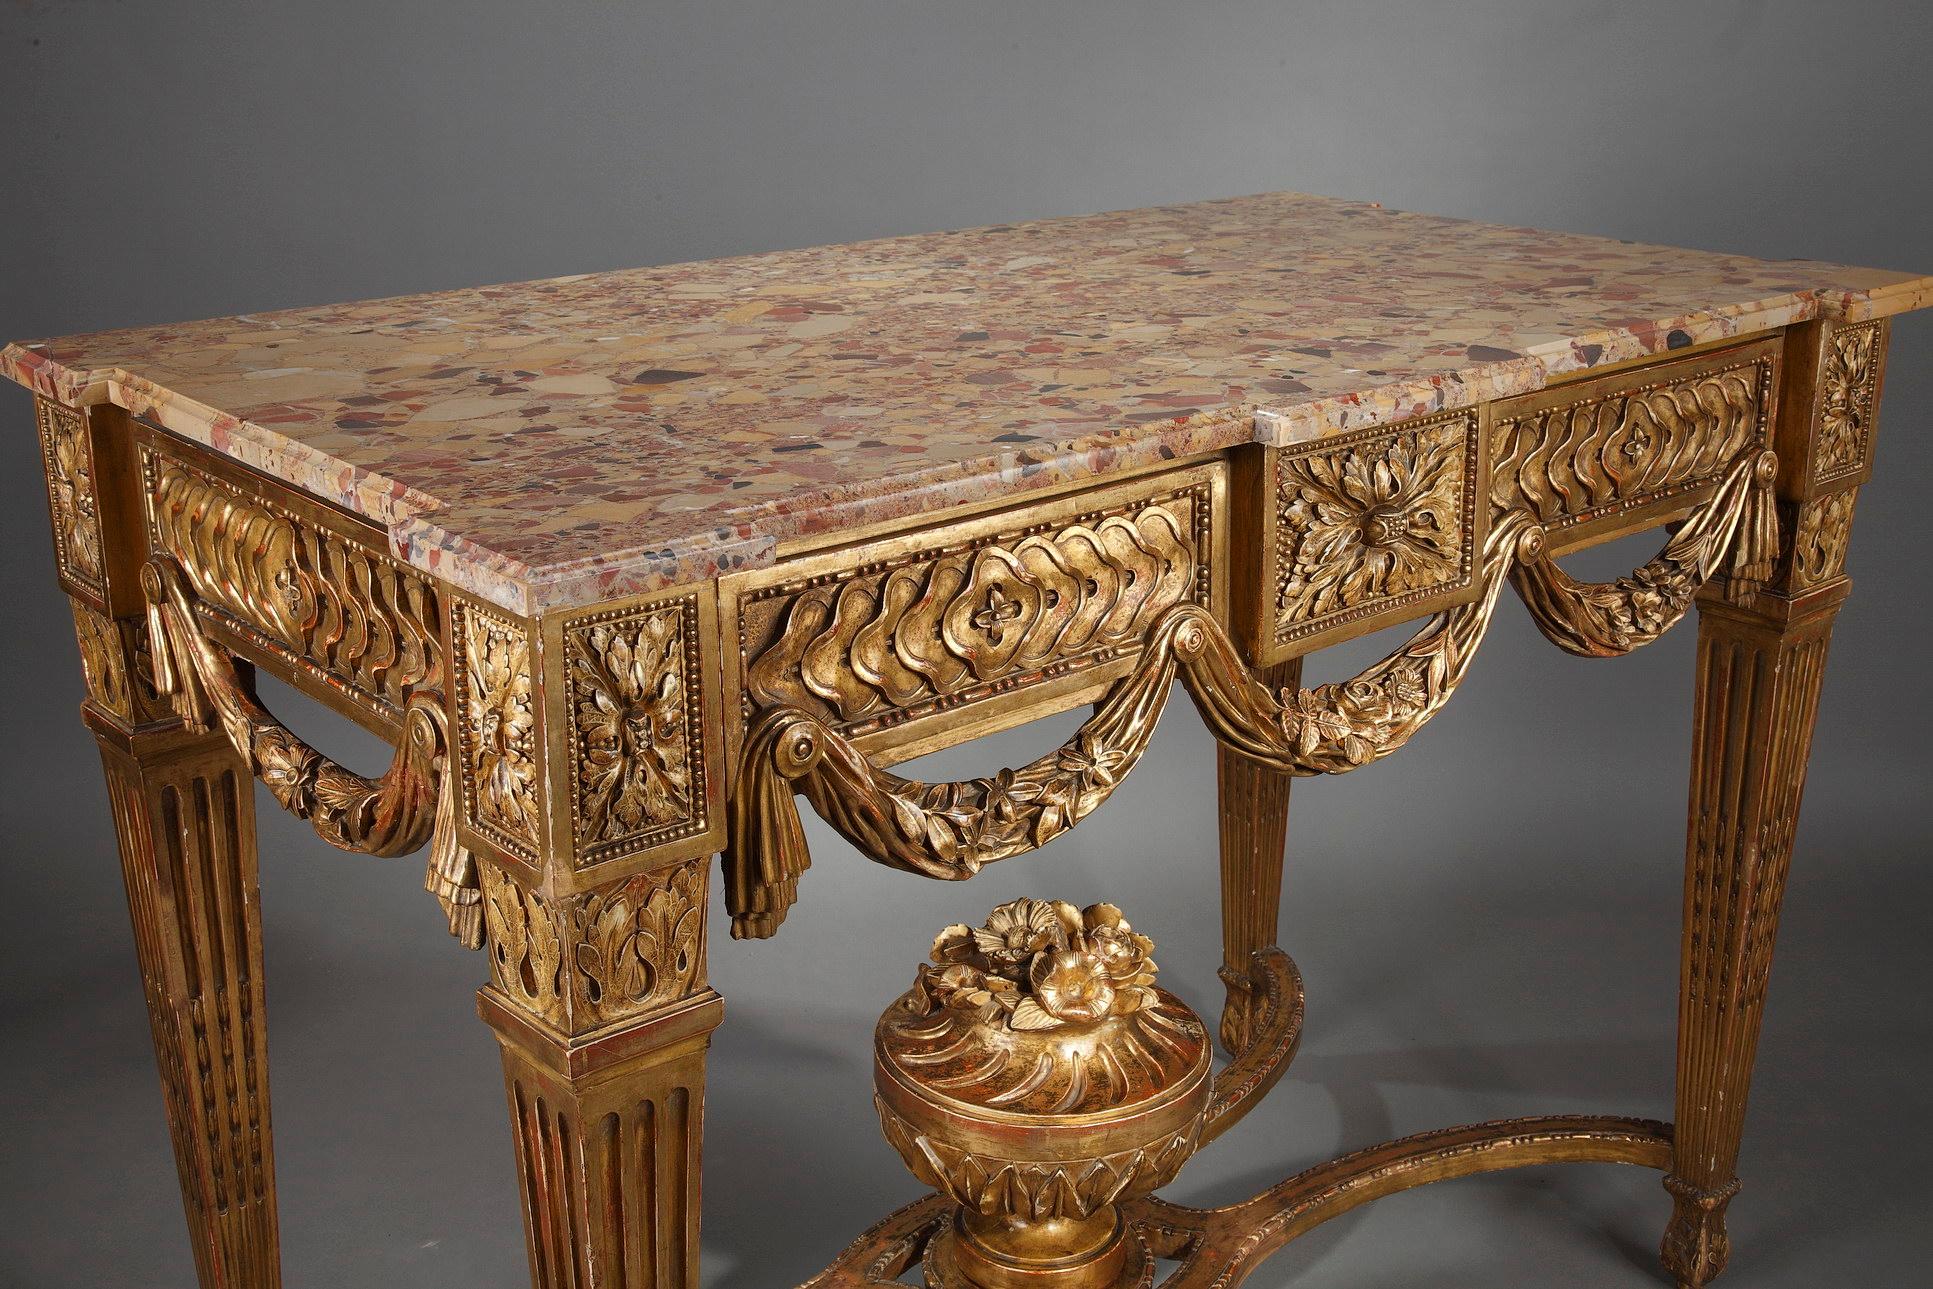 Mid-19th Century Gilded and Carved Wood Console in the Louis XVI Style